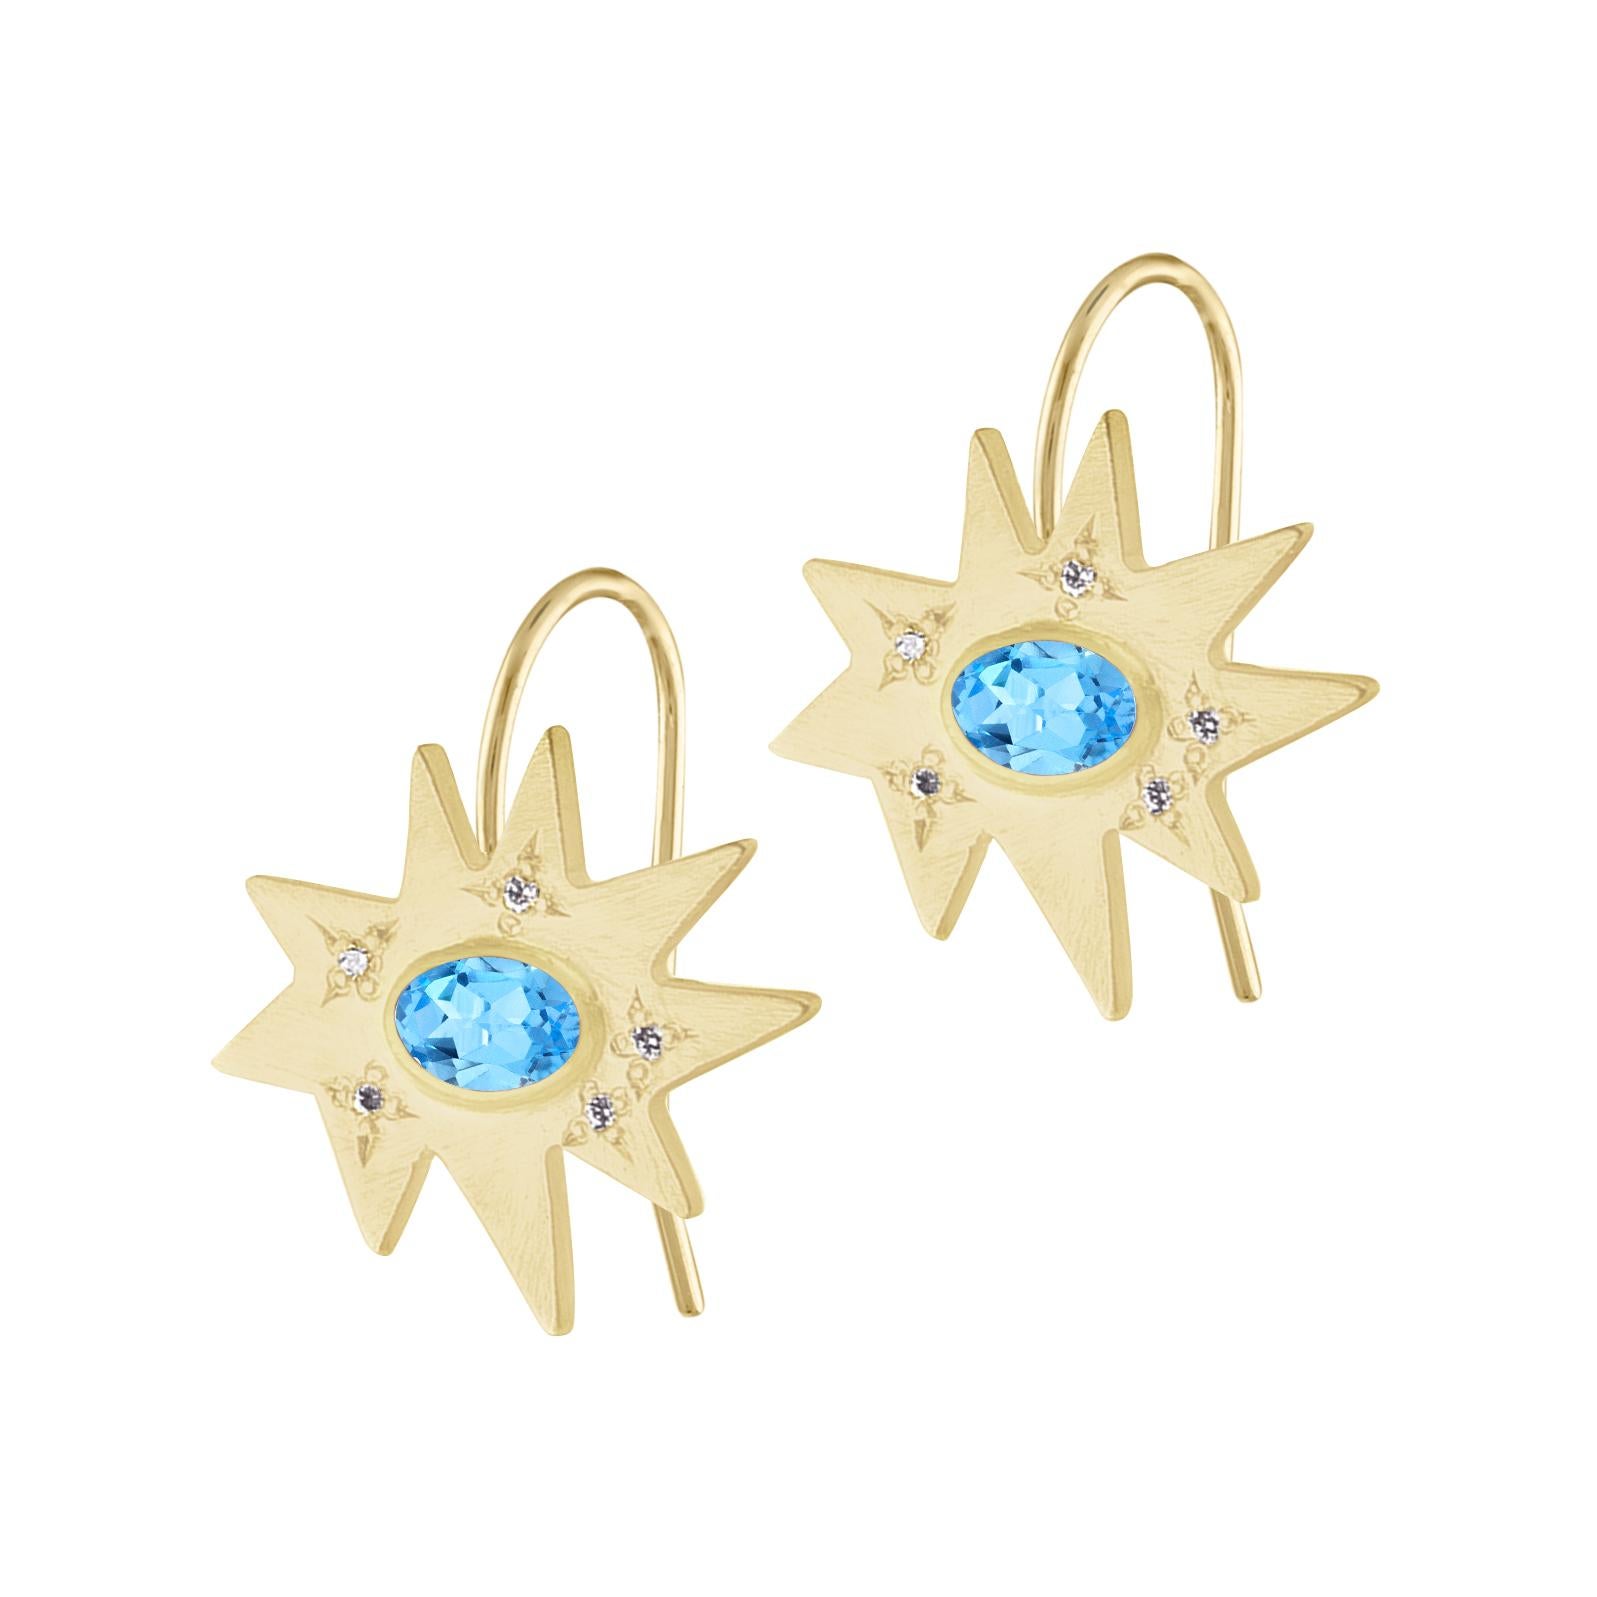 The perfect drop for any occasion. Our iconic matte gold organic shape Stellina stars are elegant on fixed French wires. Featuring our signature diamond dusting and stunning blue topaz centers, these earrings are full of sparkle.

KAPOW! The Stella